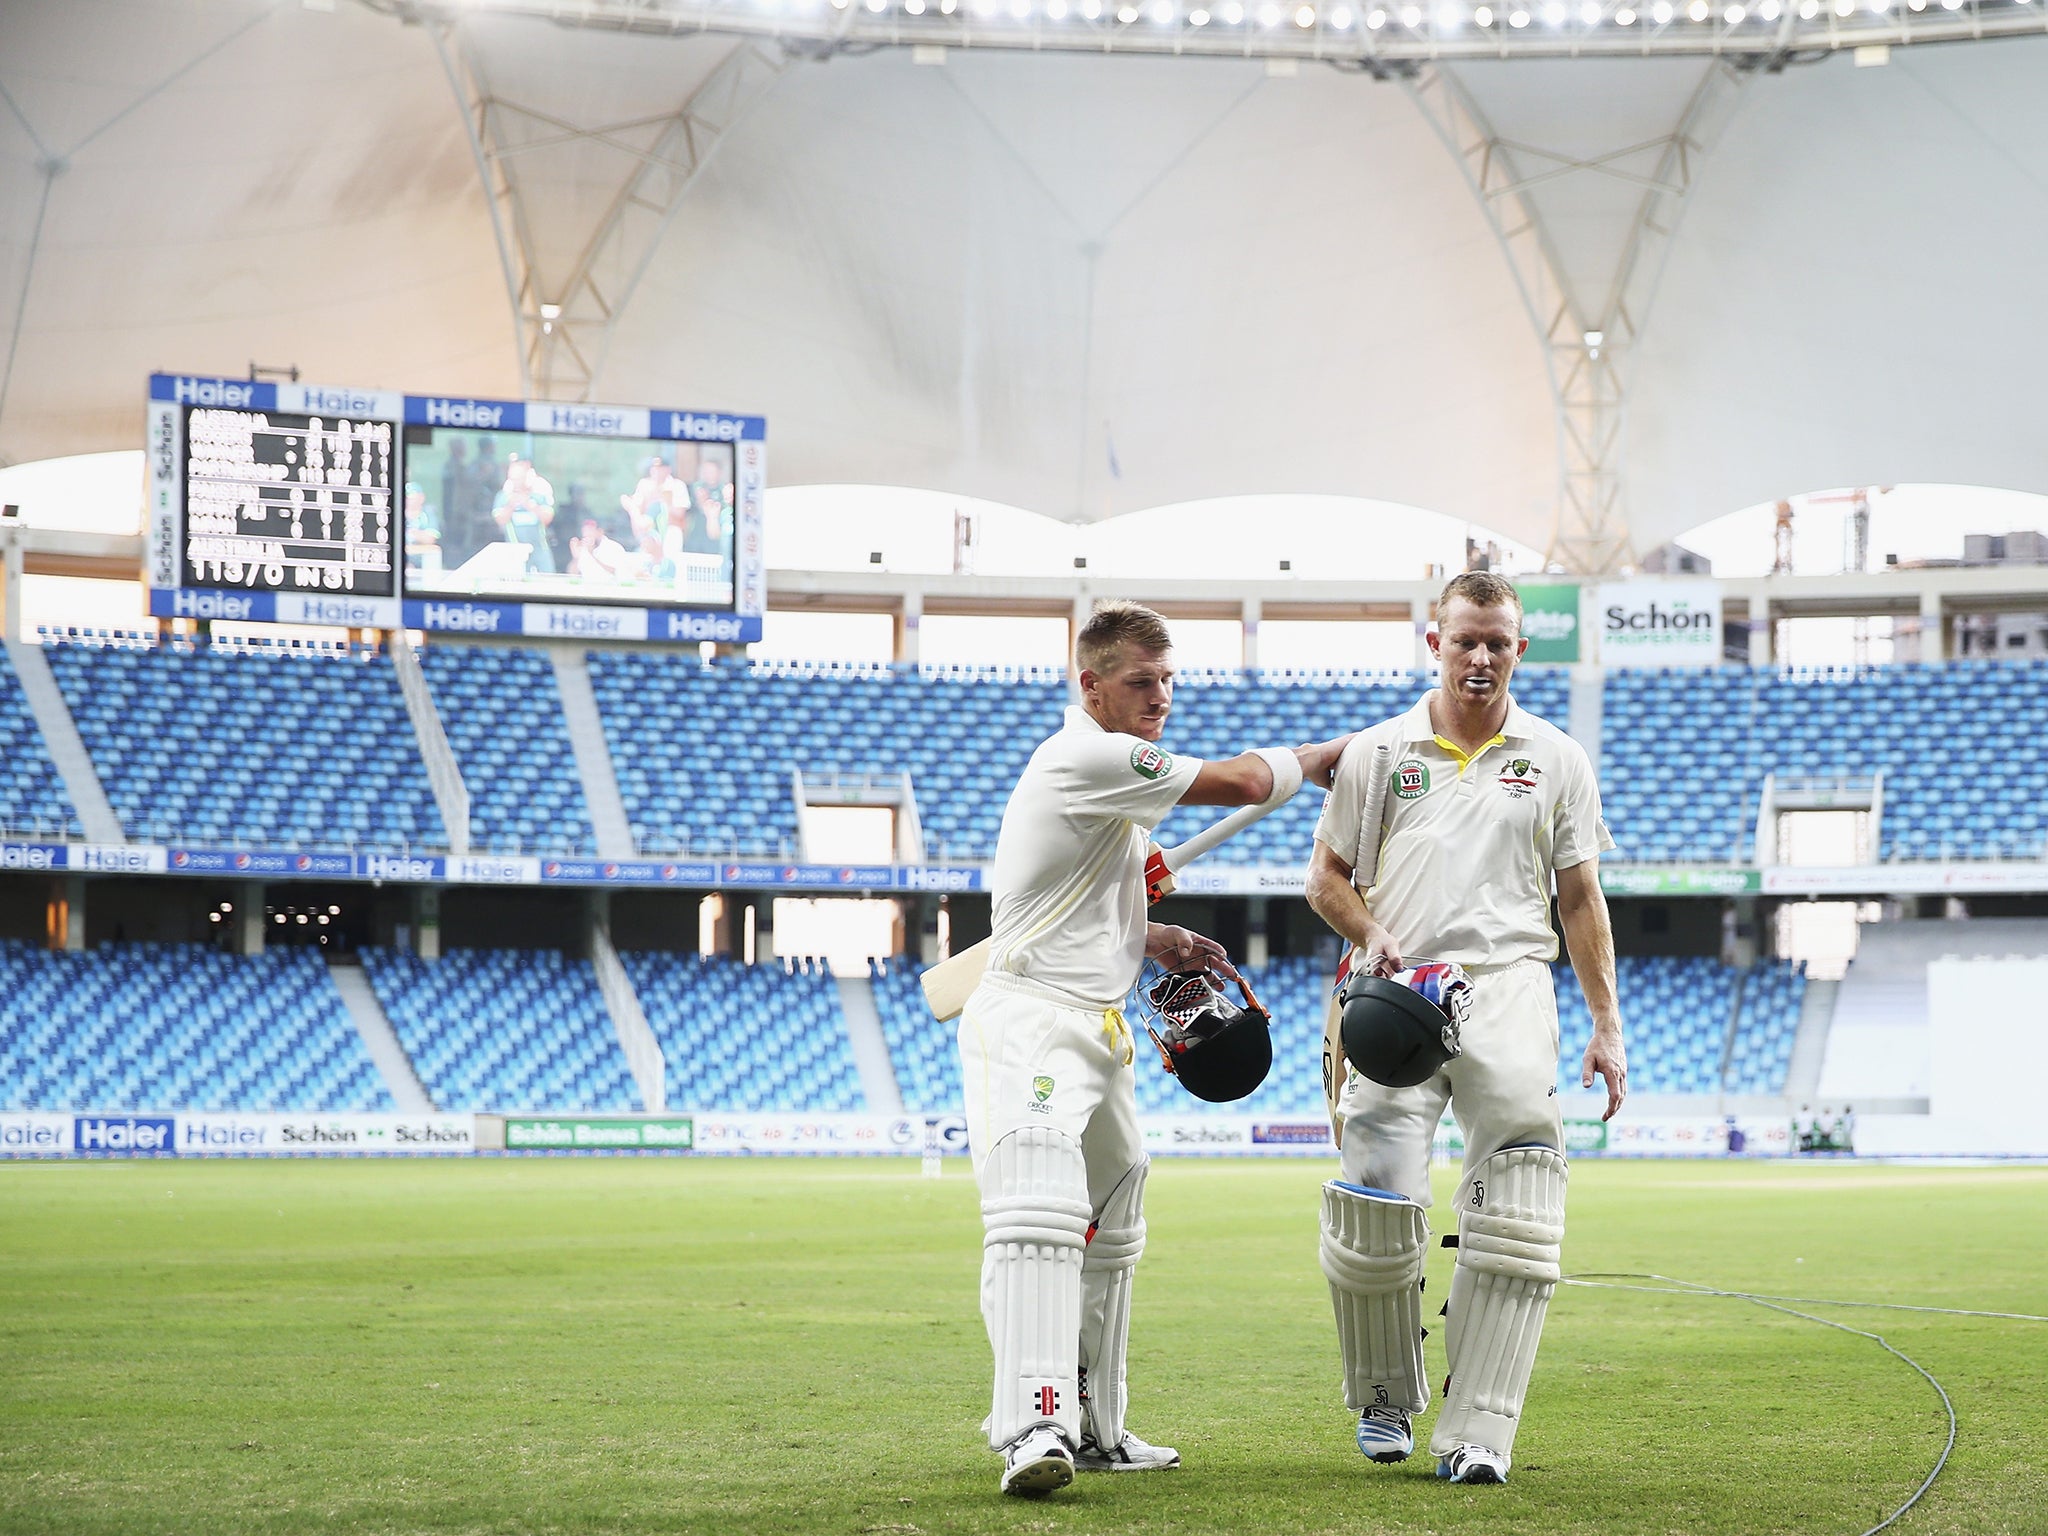 David Warner (left) and Chris Rogers leave the field after helping Australia to a solid start to their innings in Dubai yesterday